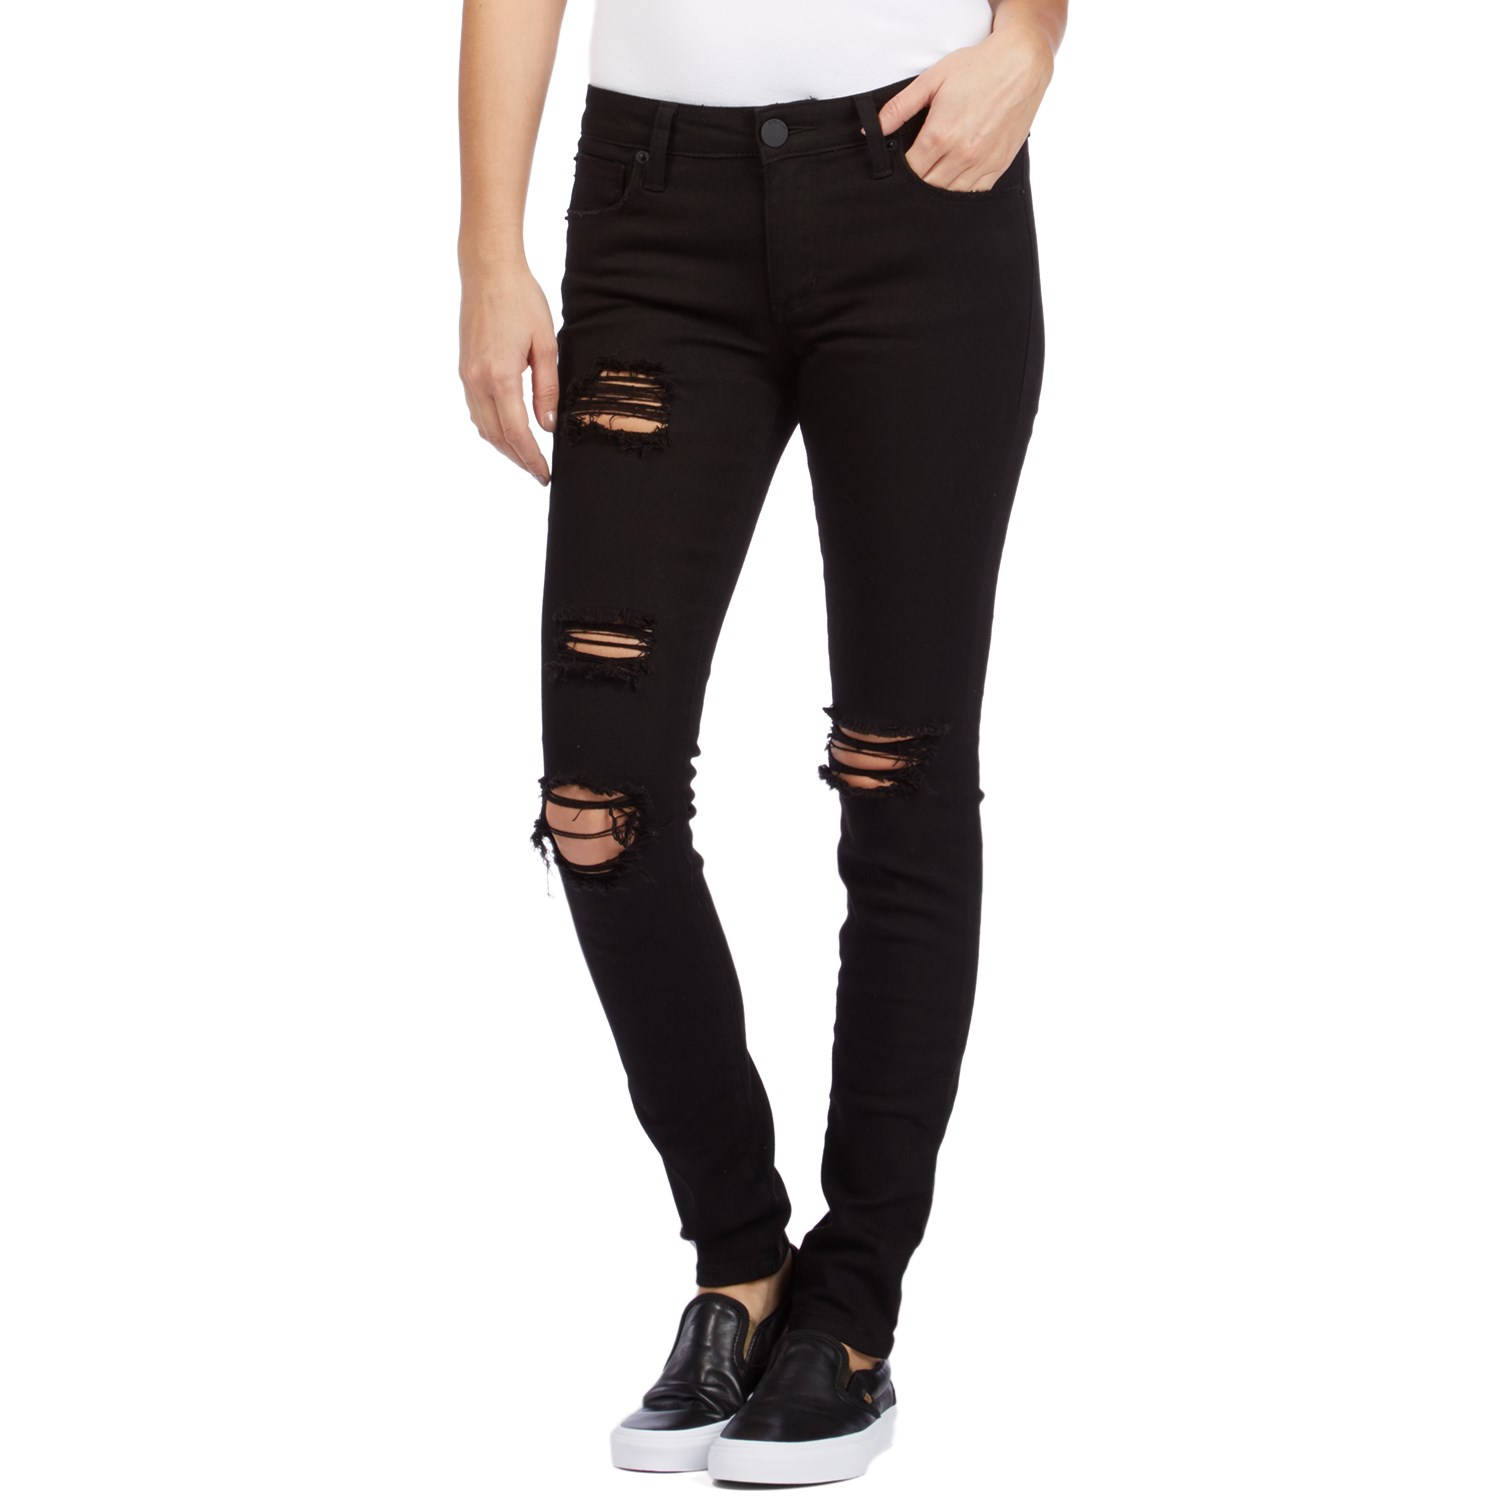 sts blue piper skinny jeans